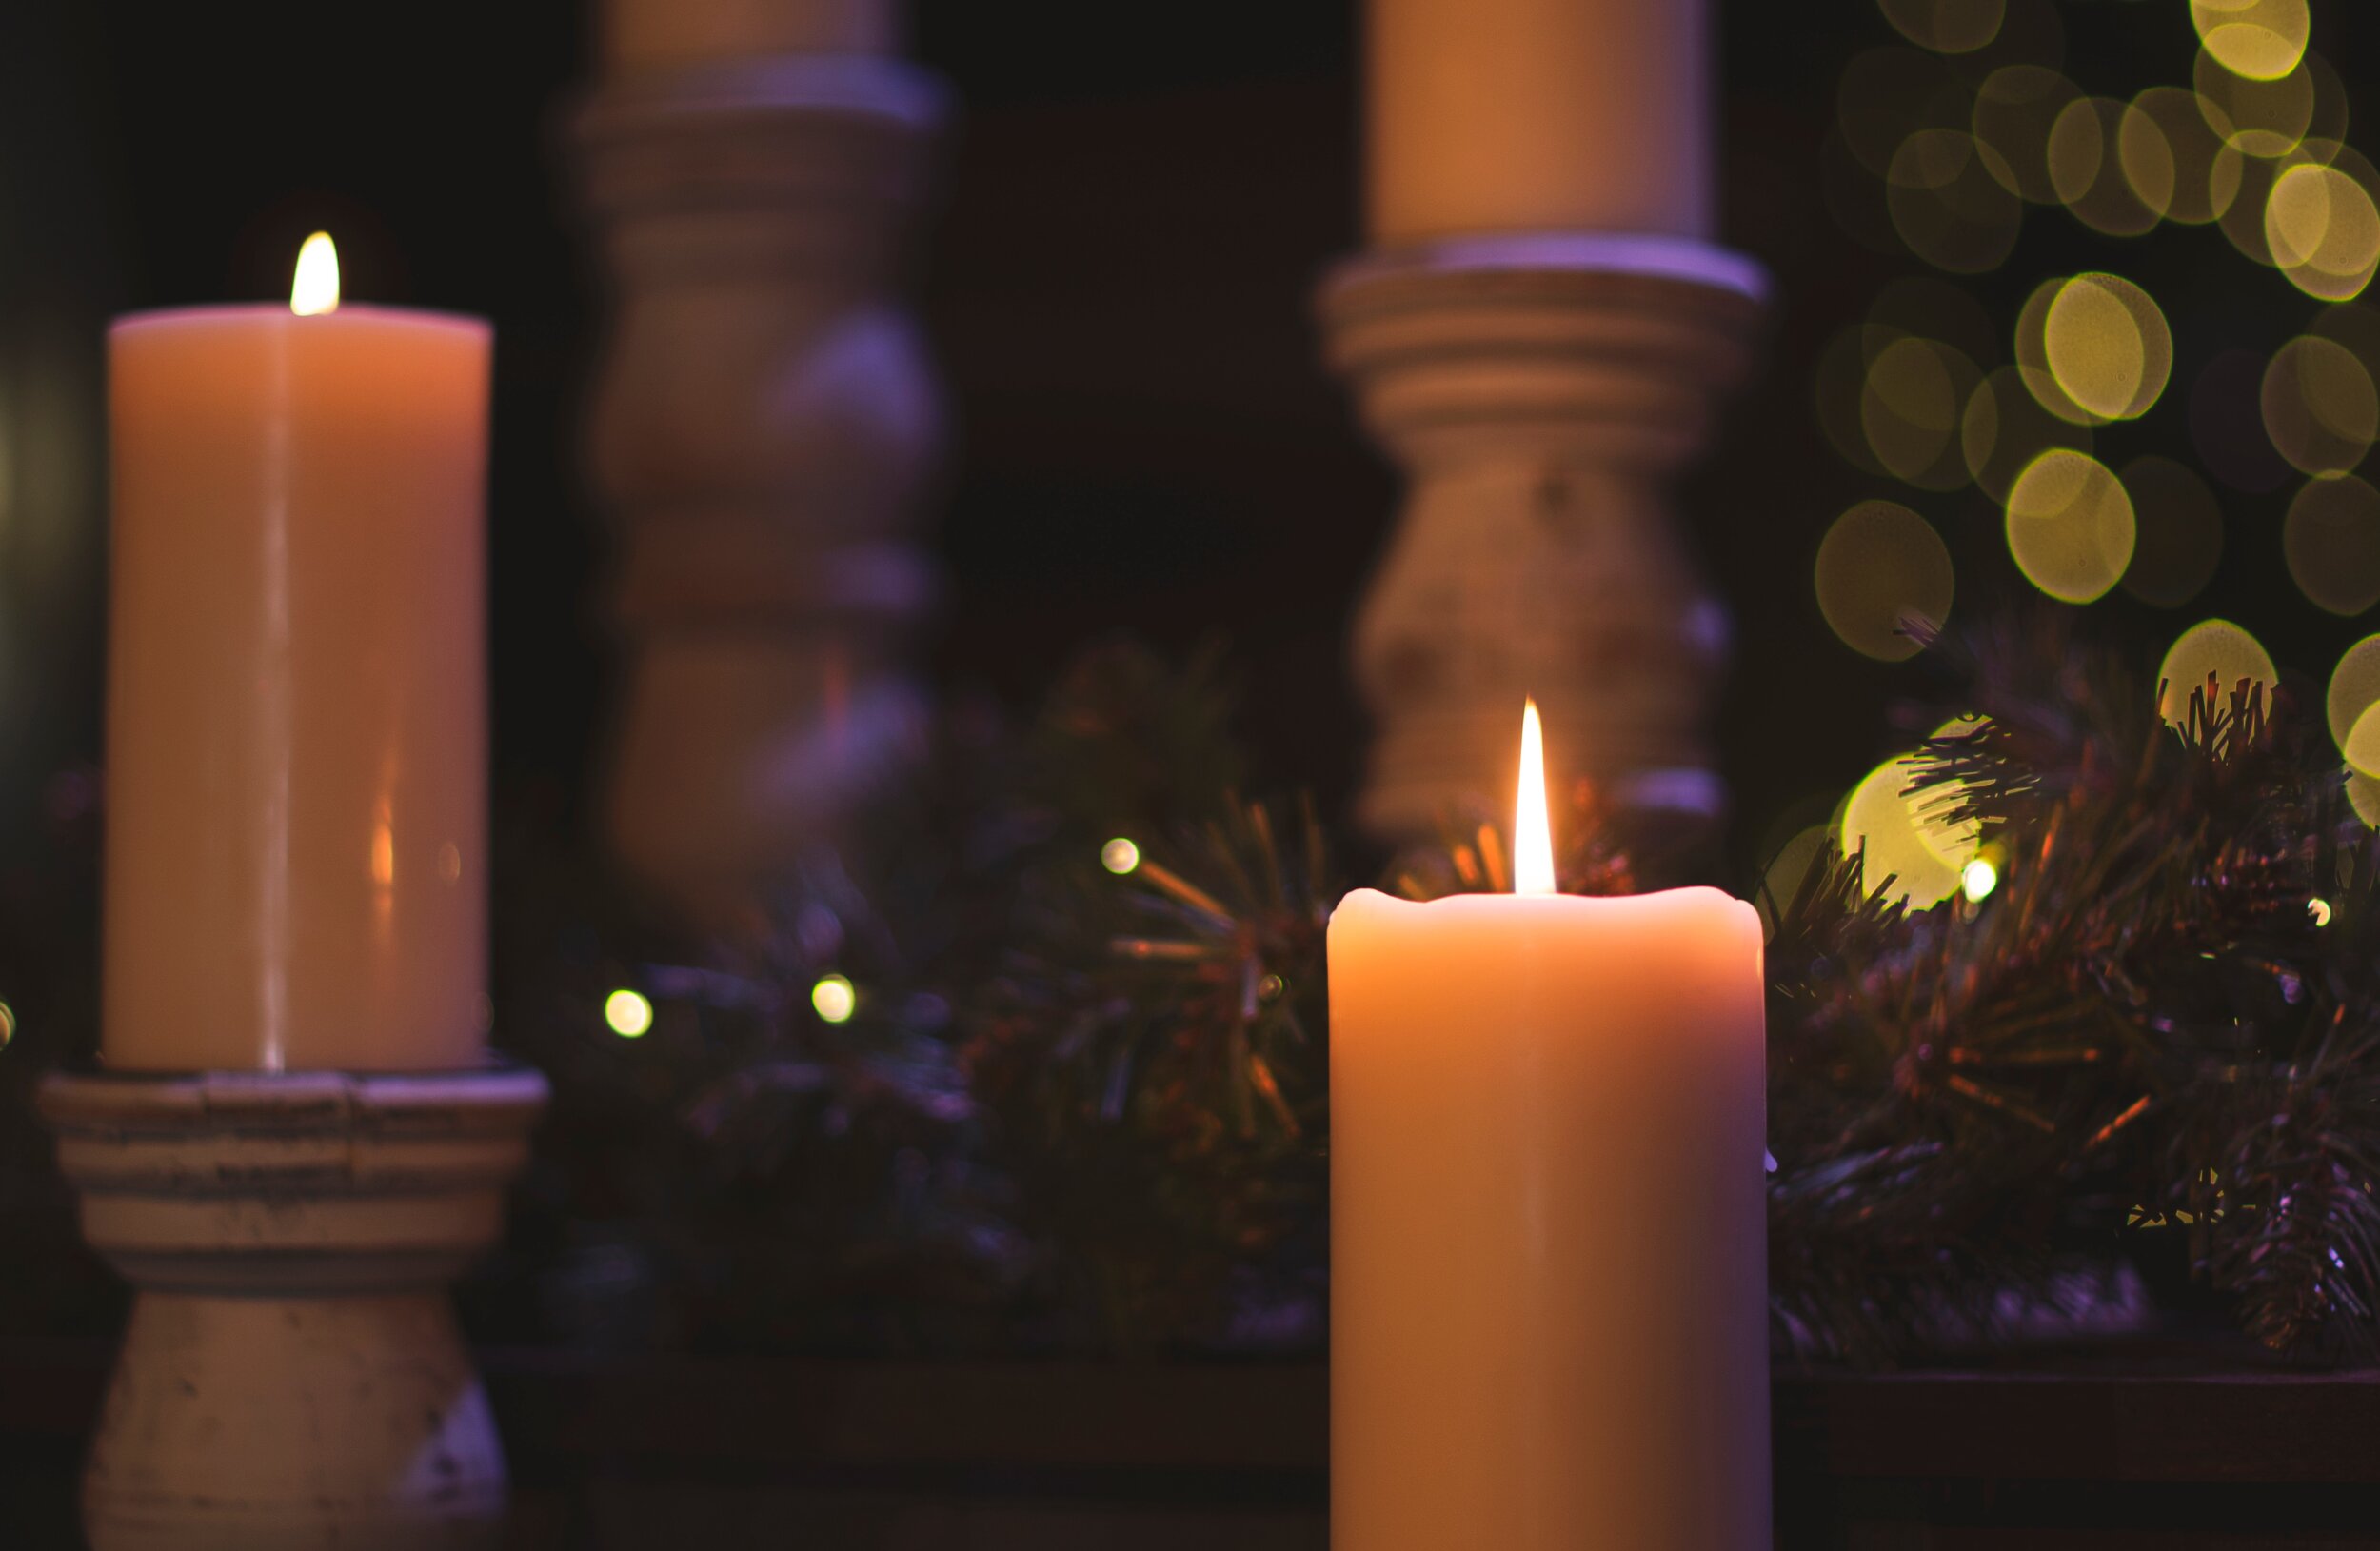 4th Sunday of Advent (peace)